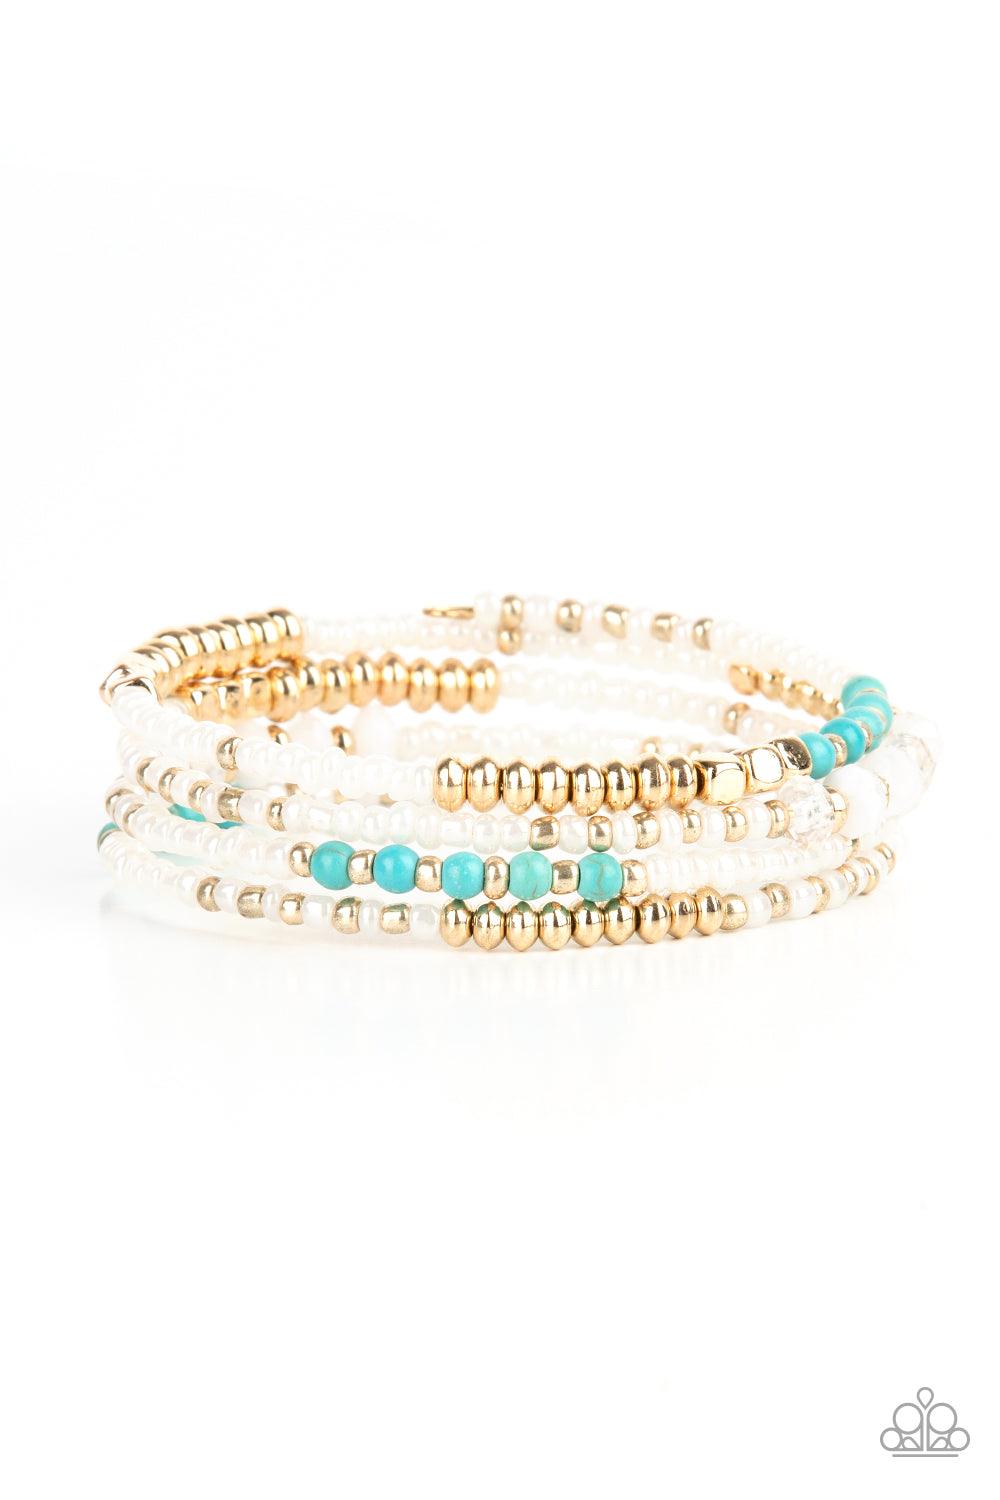 Paparazzi Accessories Infinitely Dreamy - Gold Sections of pearly white seed beads alternate with gold, turquoise, and crystal-like beads in infinite rows. The dreamy colors are threaded along a continuous strand of wire for an infinity wrap-style bracele